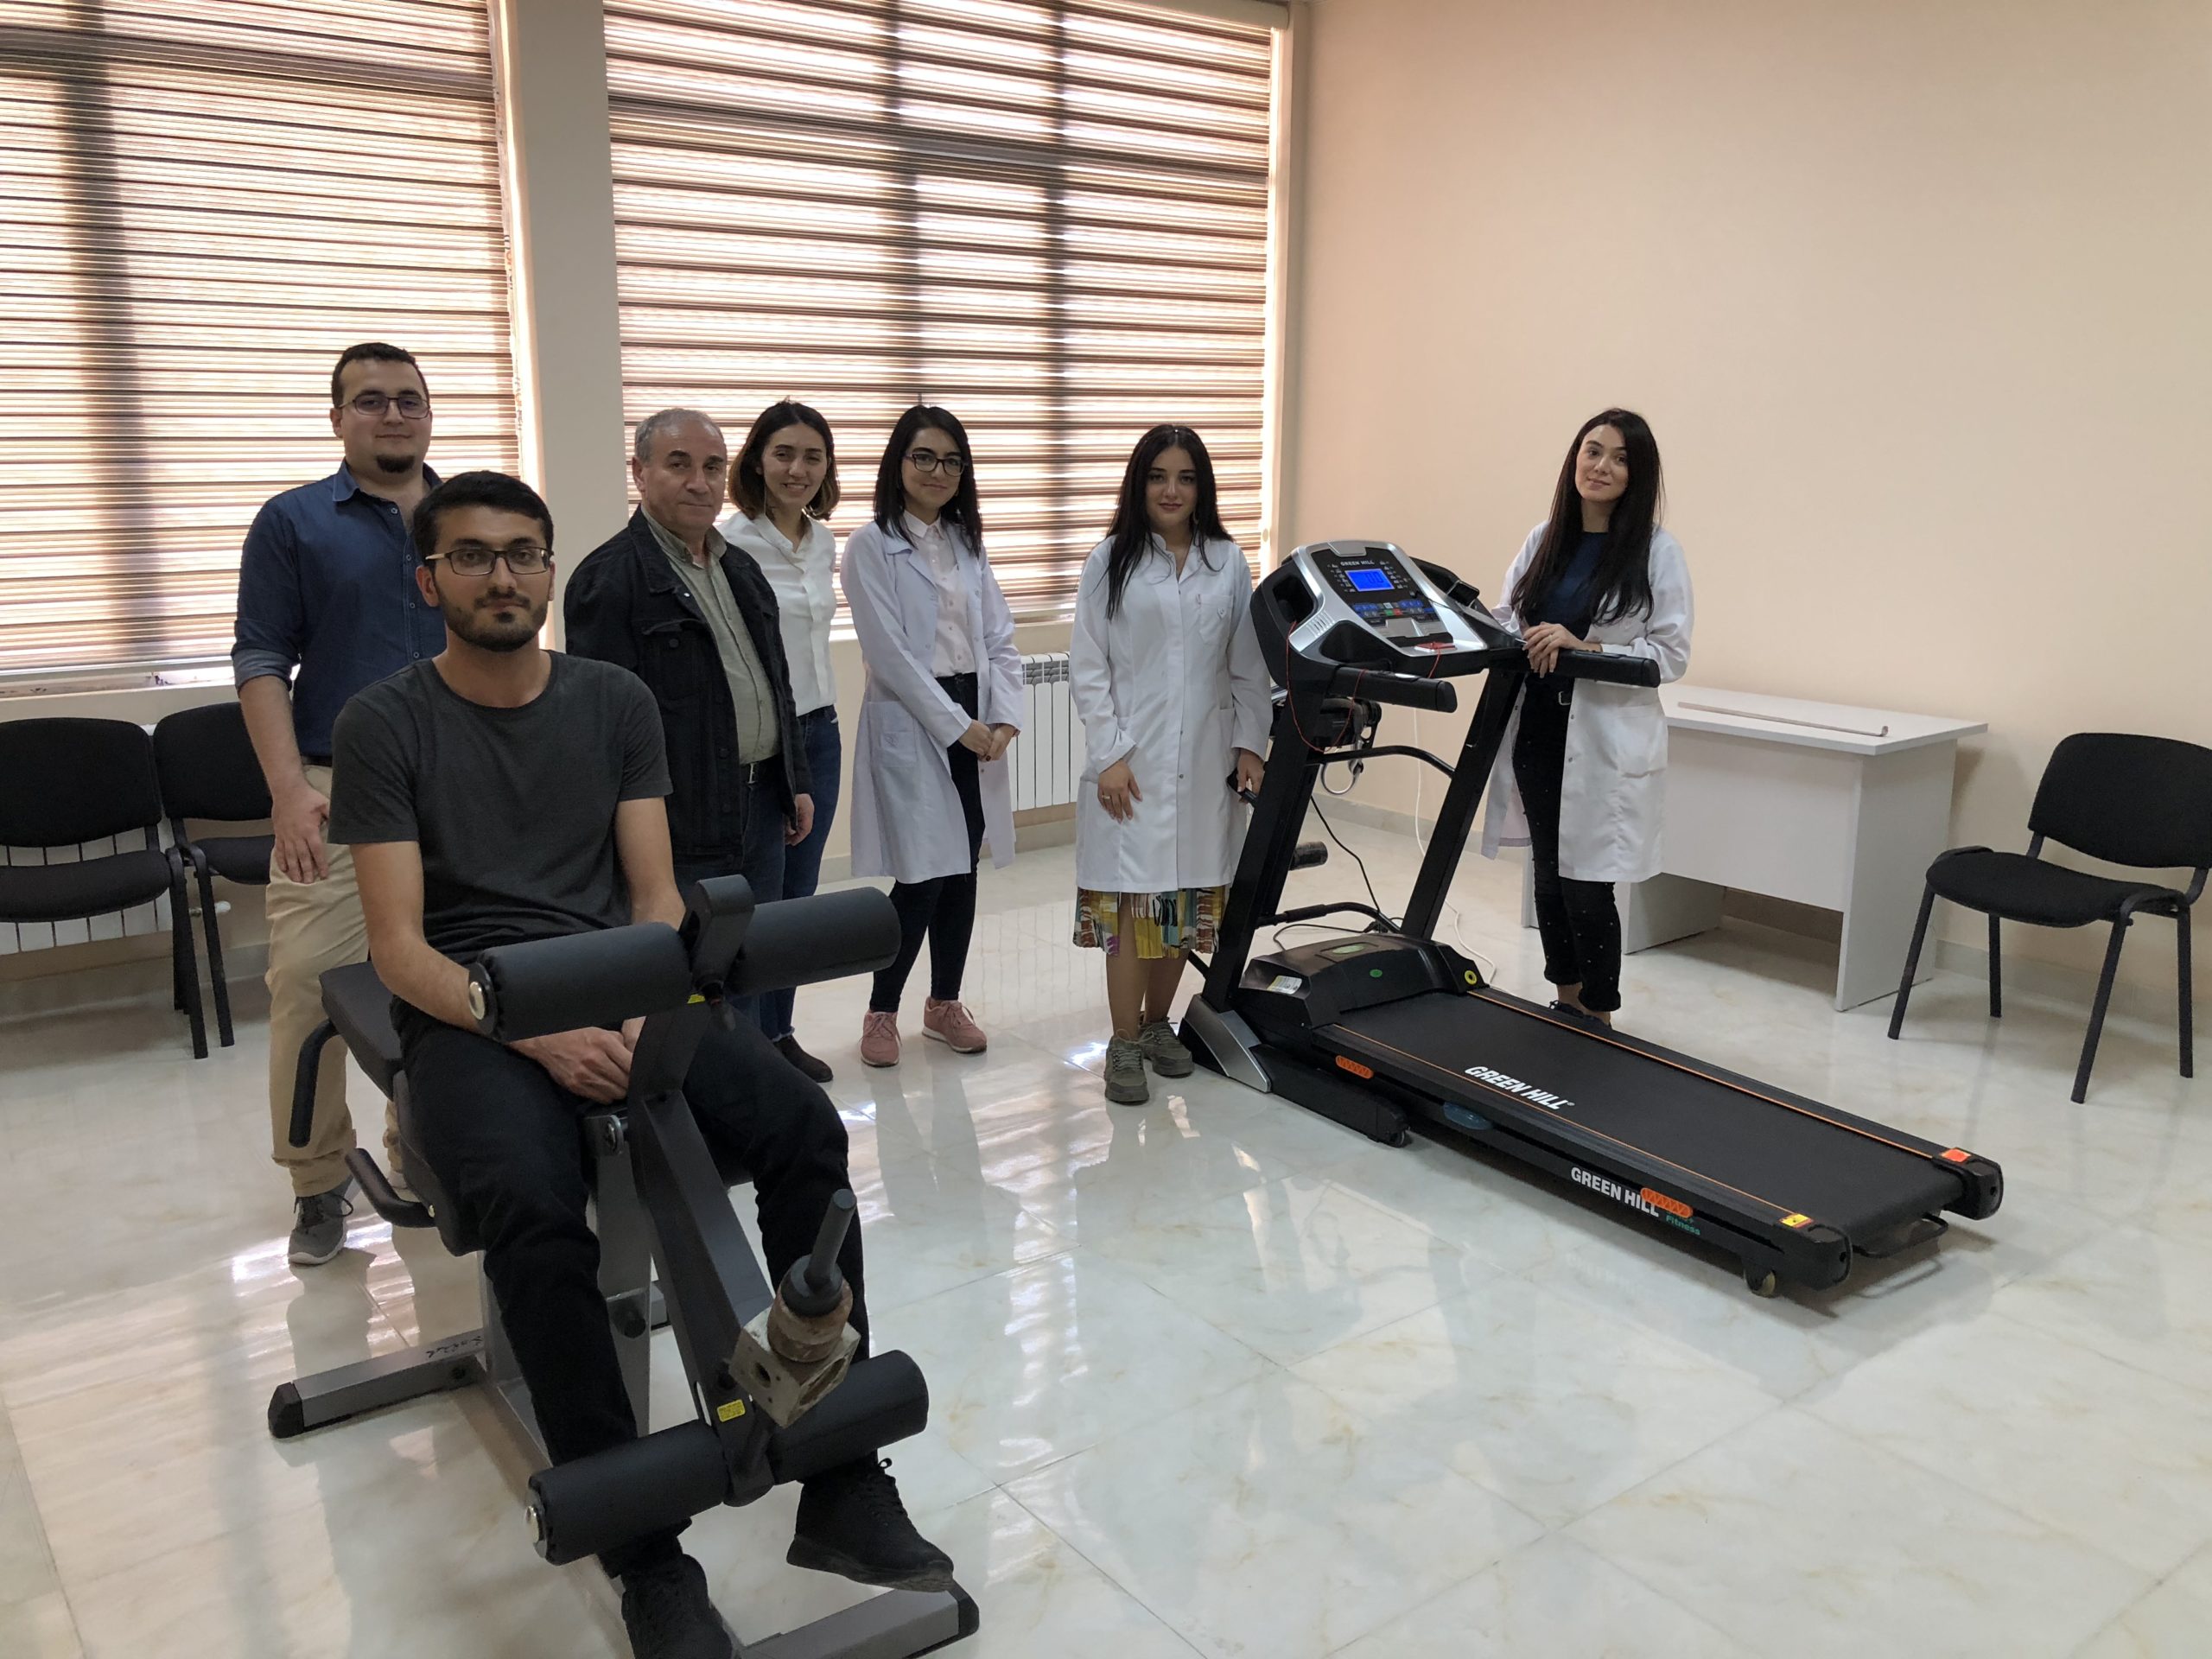 At the Institute of Biophysics of ANAS, on the initiative of the Trade Union Organization installed sports exercise machines